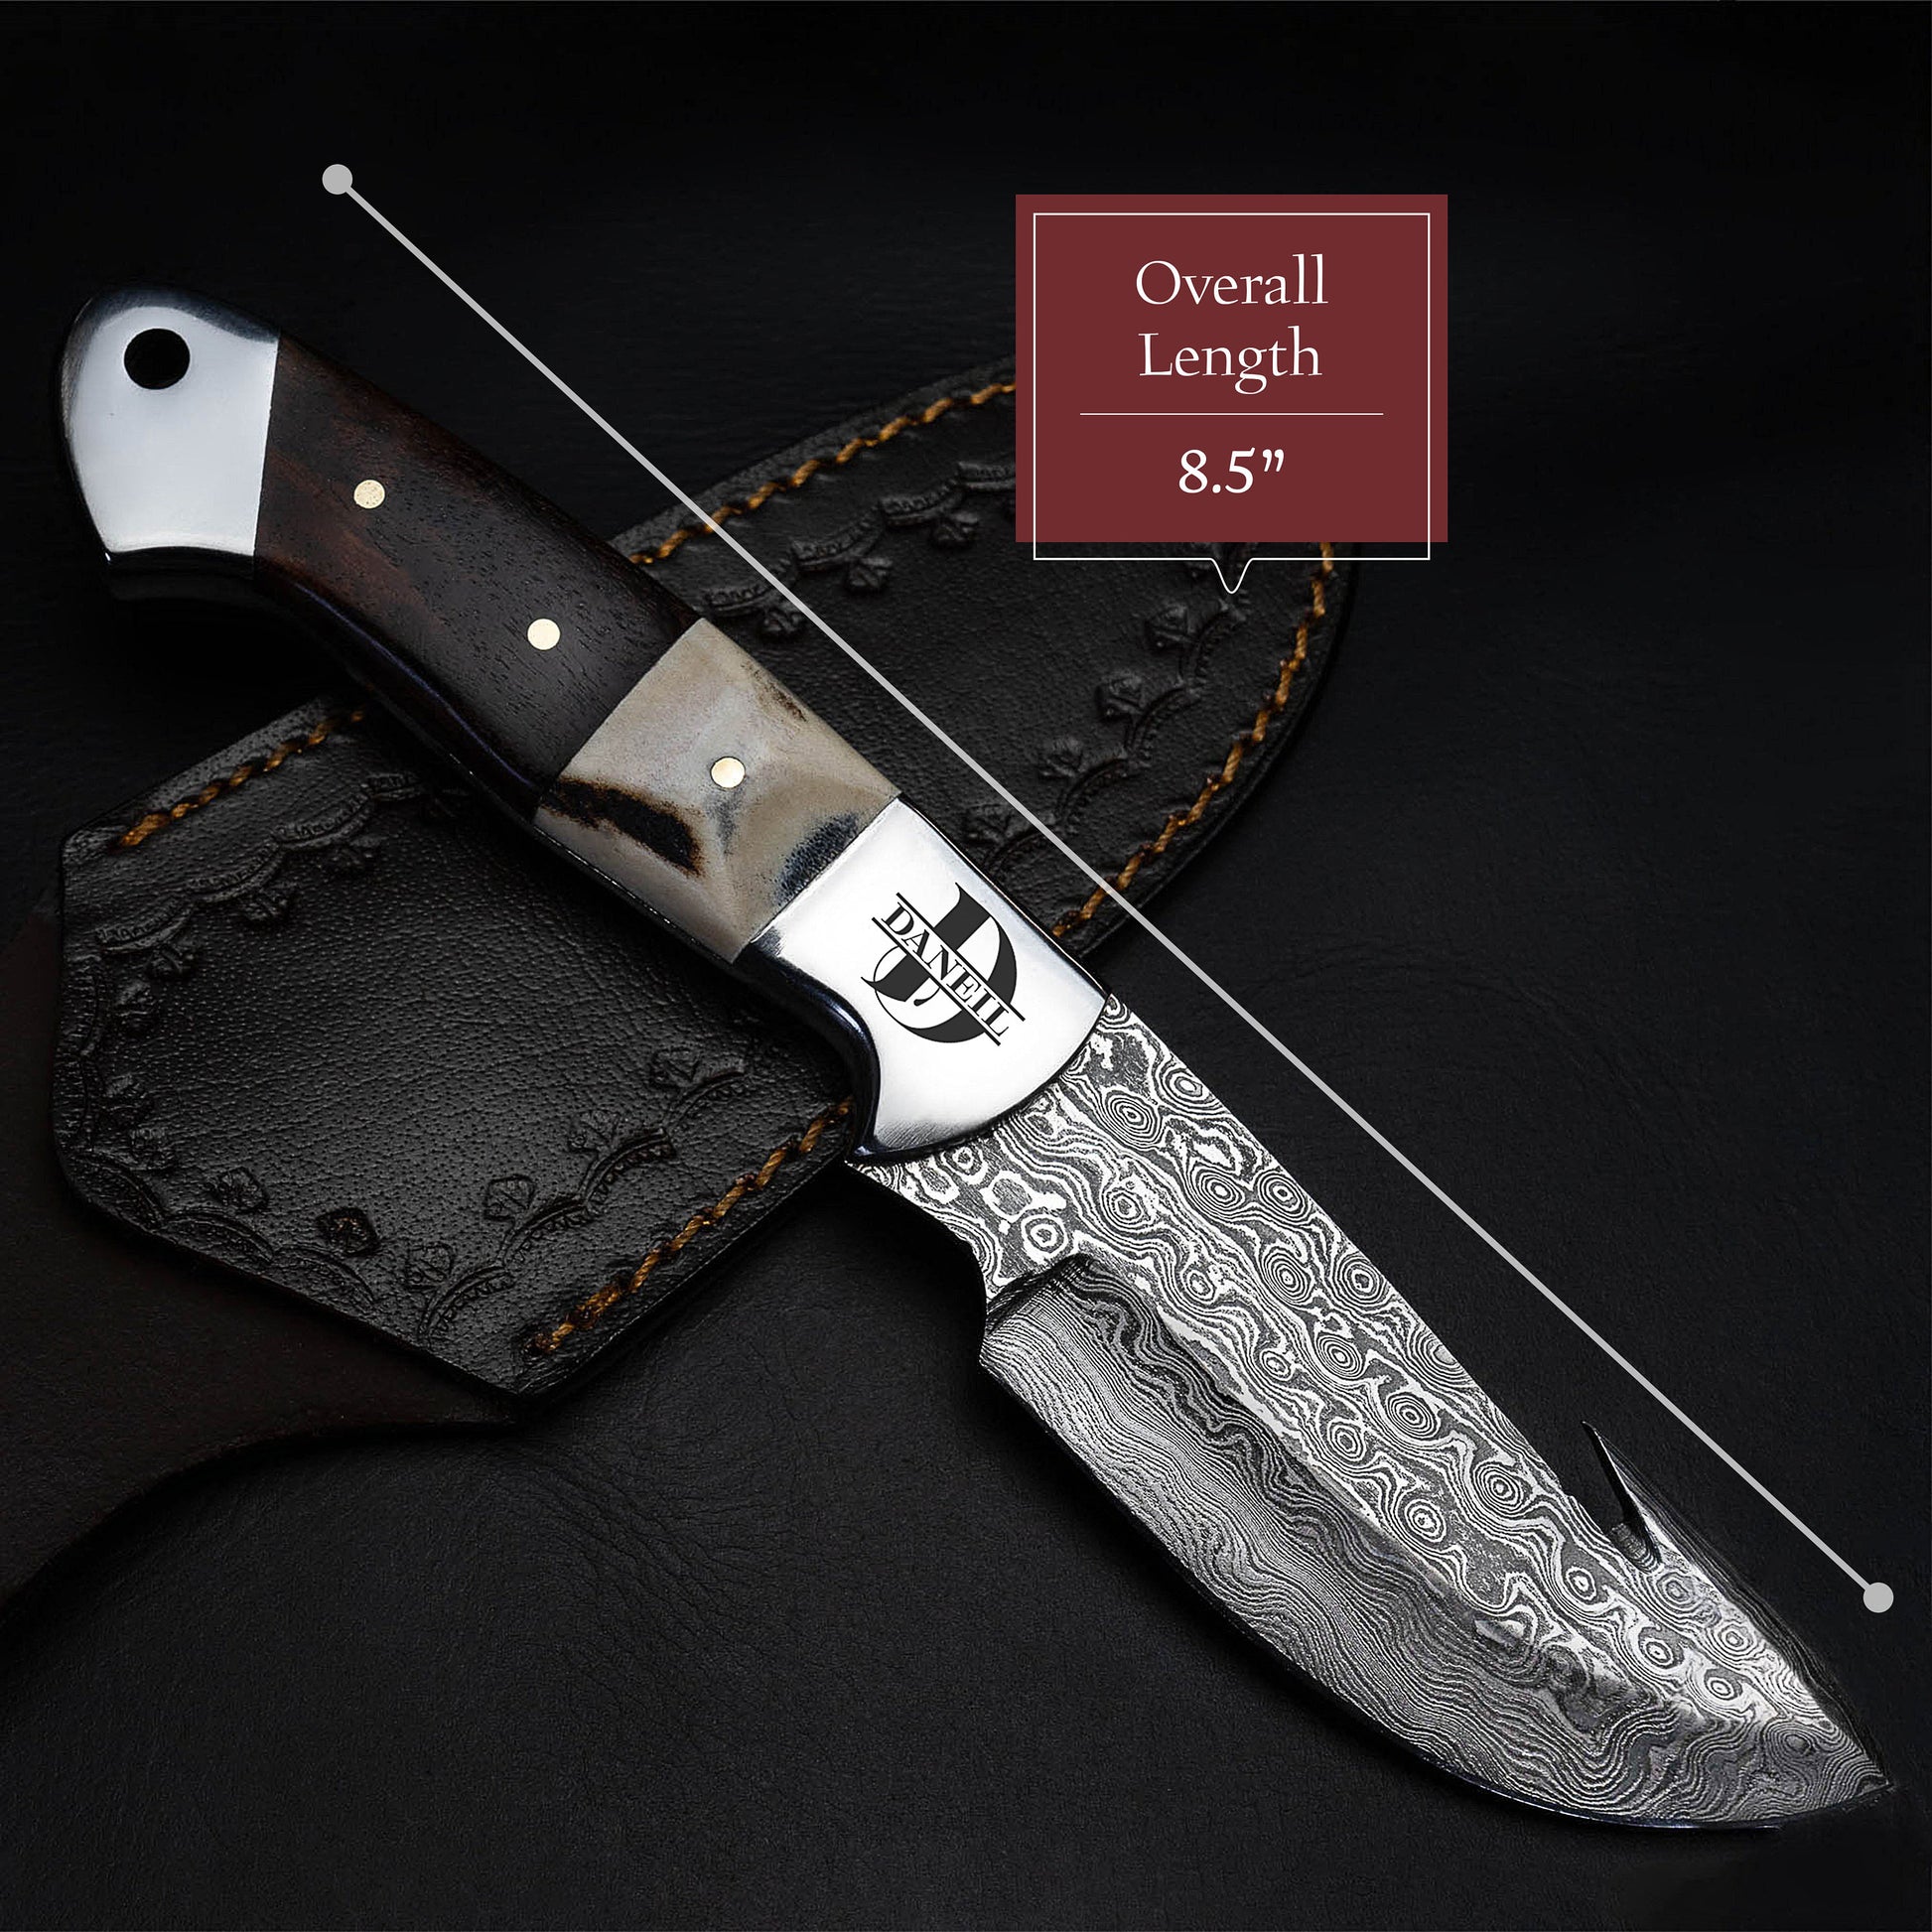 Gut Hook Bone Wood Handle Fixed Blade Full Tang Hunting/Camping Knife - Authentic Damascus 8.5" Knife by morfsteelware Gift for Him, Dad